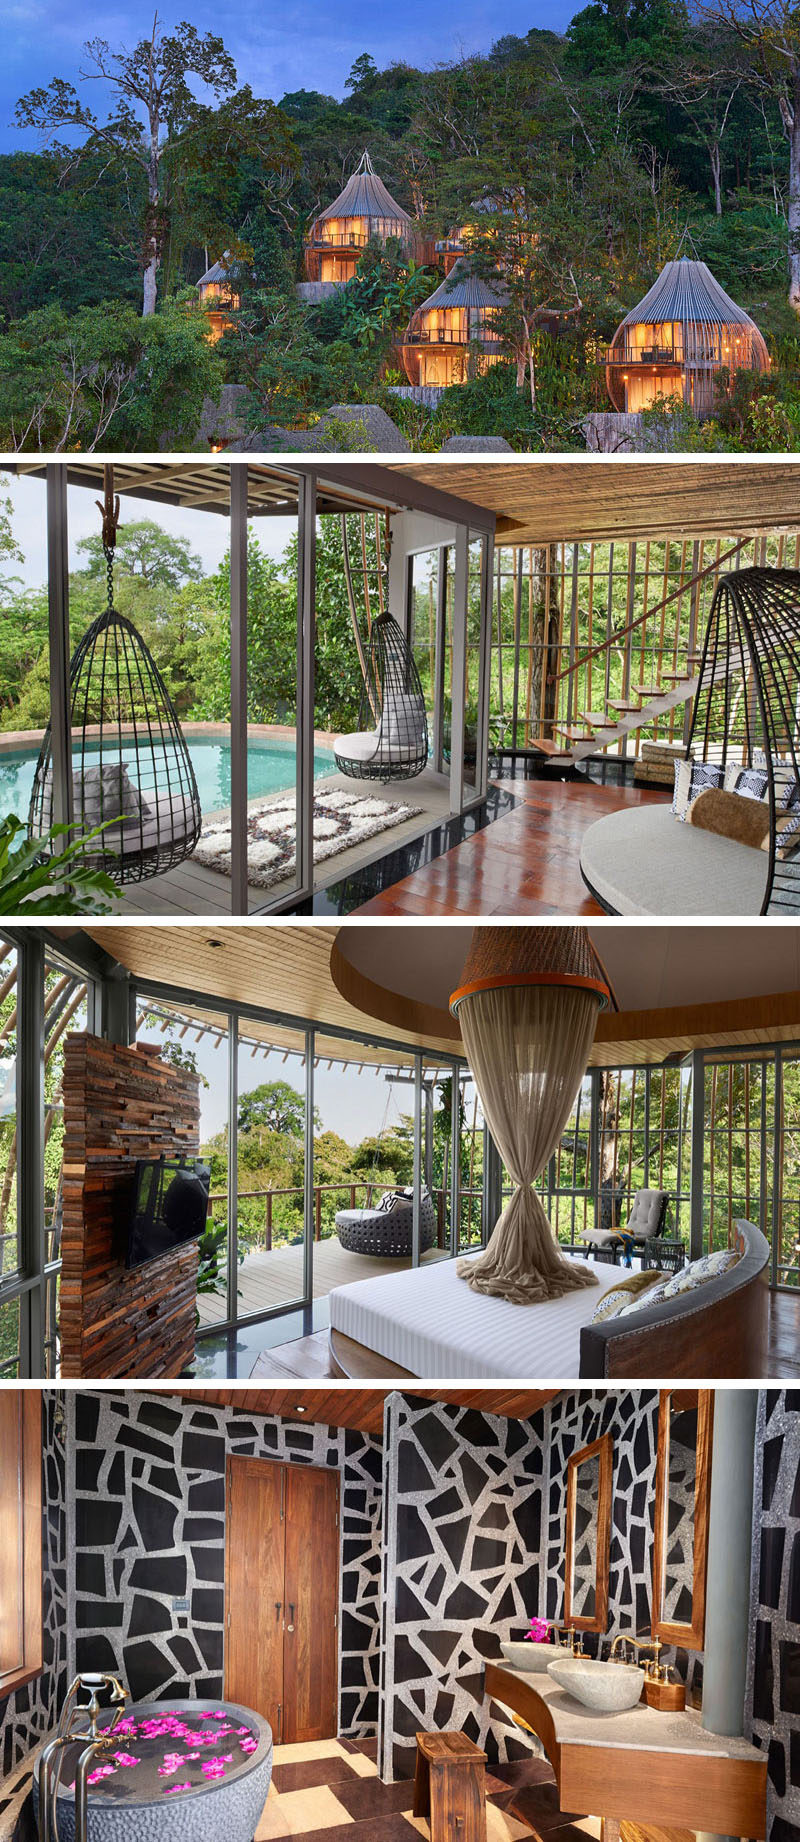 Travel Idea - At the Keemala Resort in Thailand, this private villa has a pool, a spa like bathroom, and incredible panoramic views give guests an opportunity to unwind and get closer to nature while still enjoying the luxuries of a resort stay.